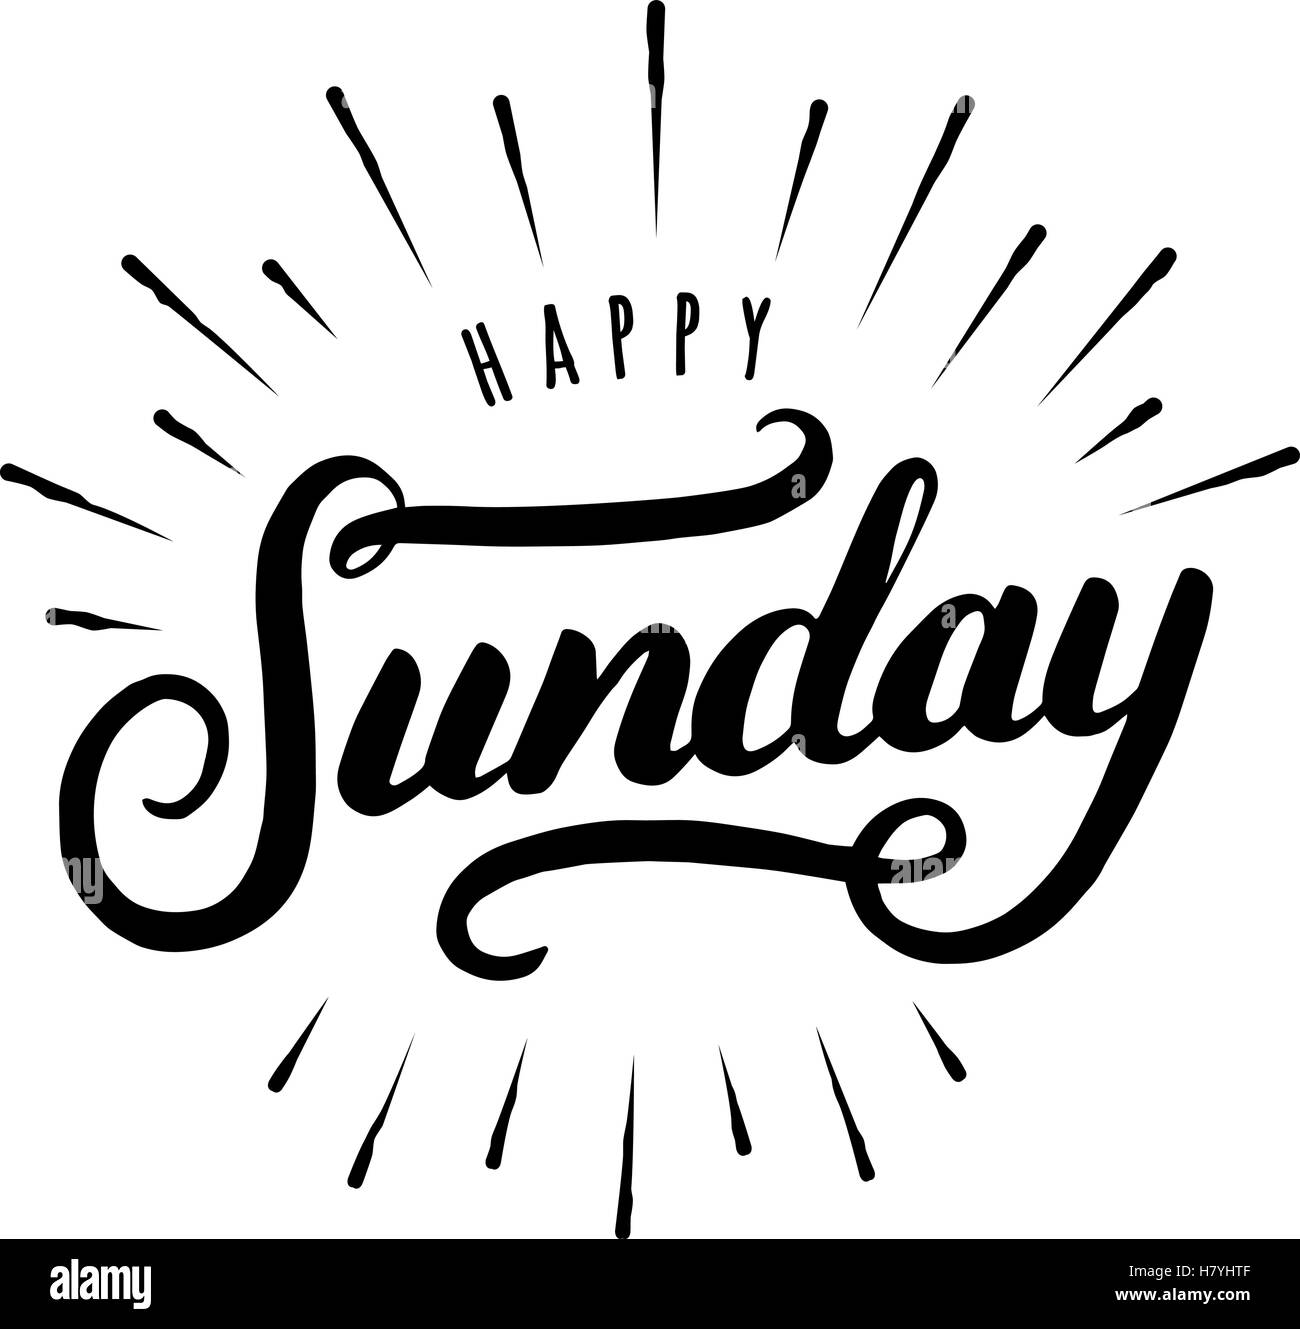 Happy Sunday hand drawn lettering. Modern brush calligraphy design for card, poster, social media post, photo overlay. Vector il Stock Vector